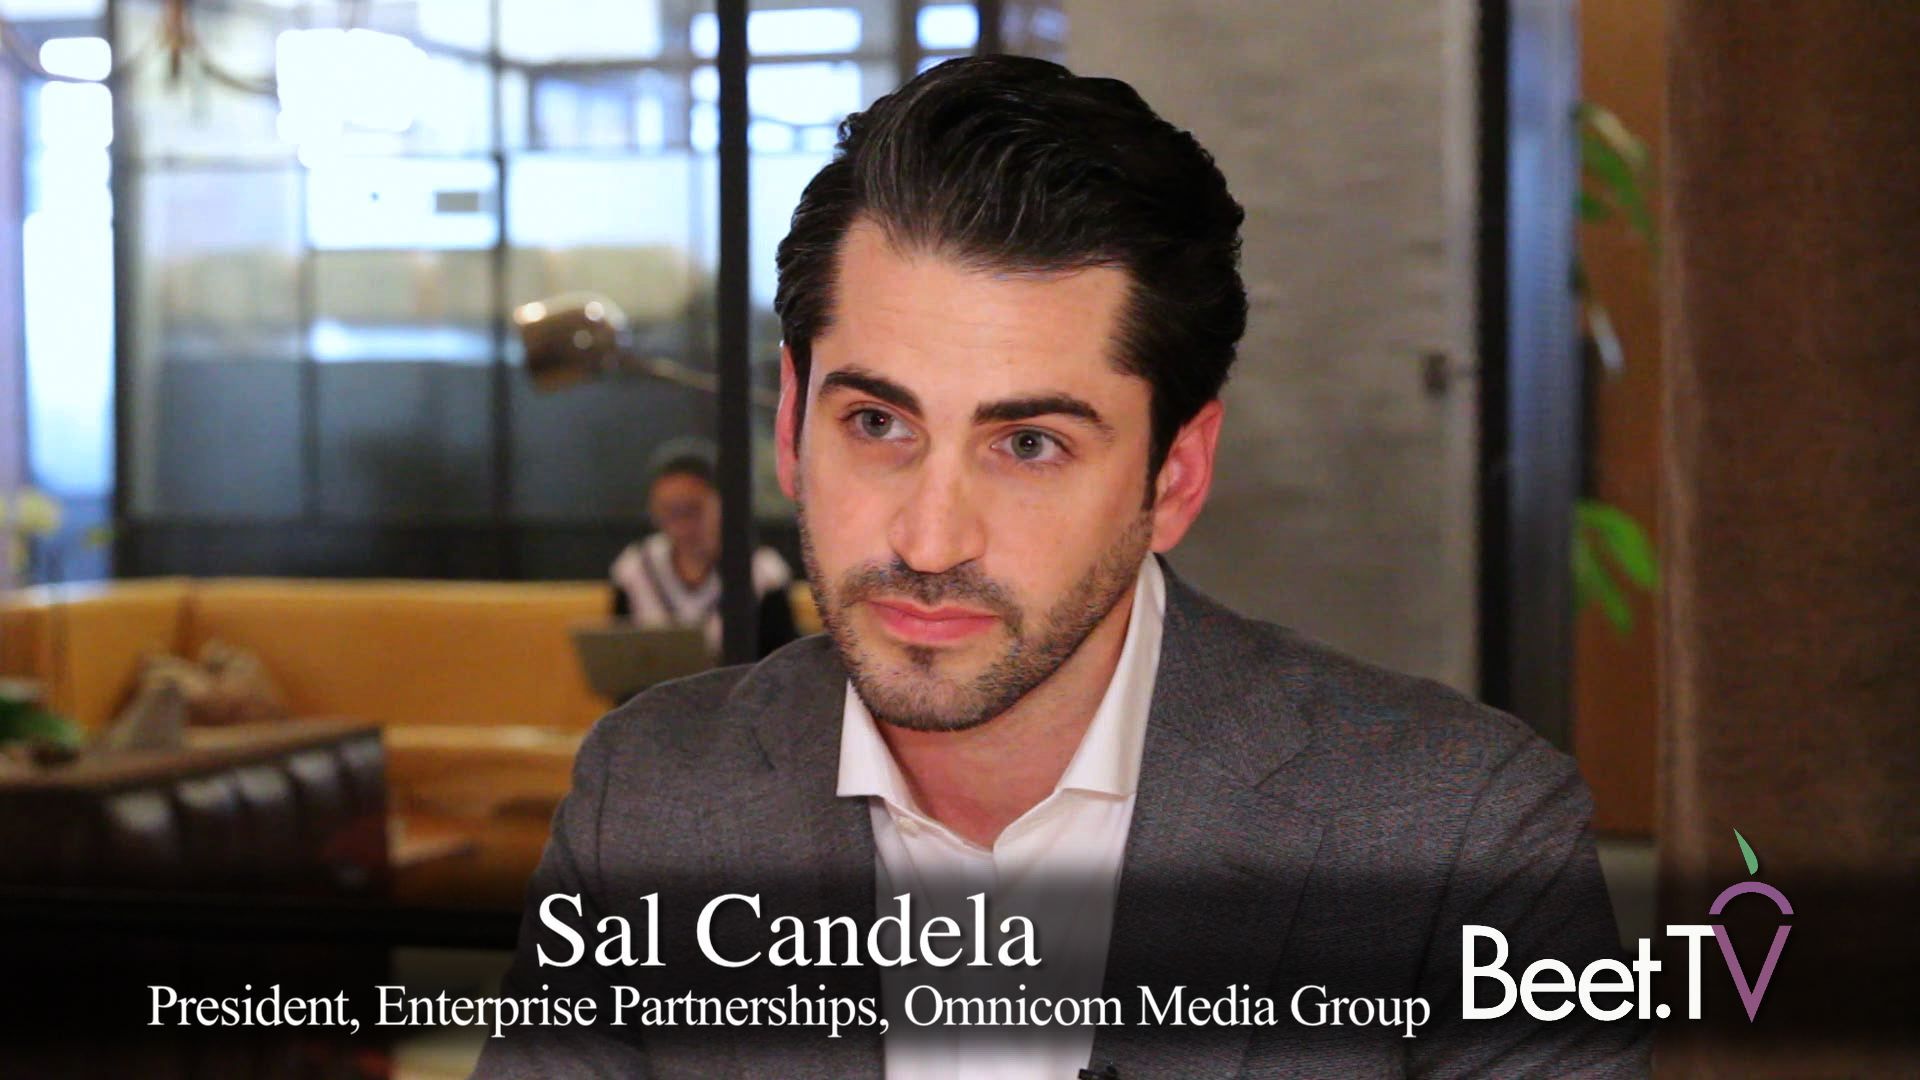 With OTT At ‘Critical Mass,’ Ad Experiences Take Precedence: Omnicom’s Candela